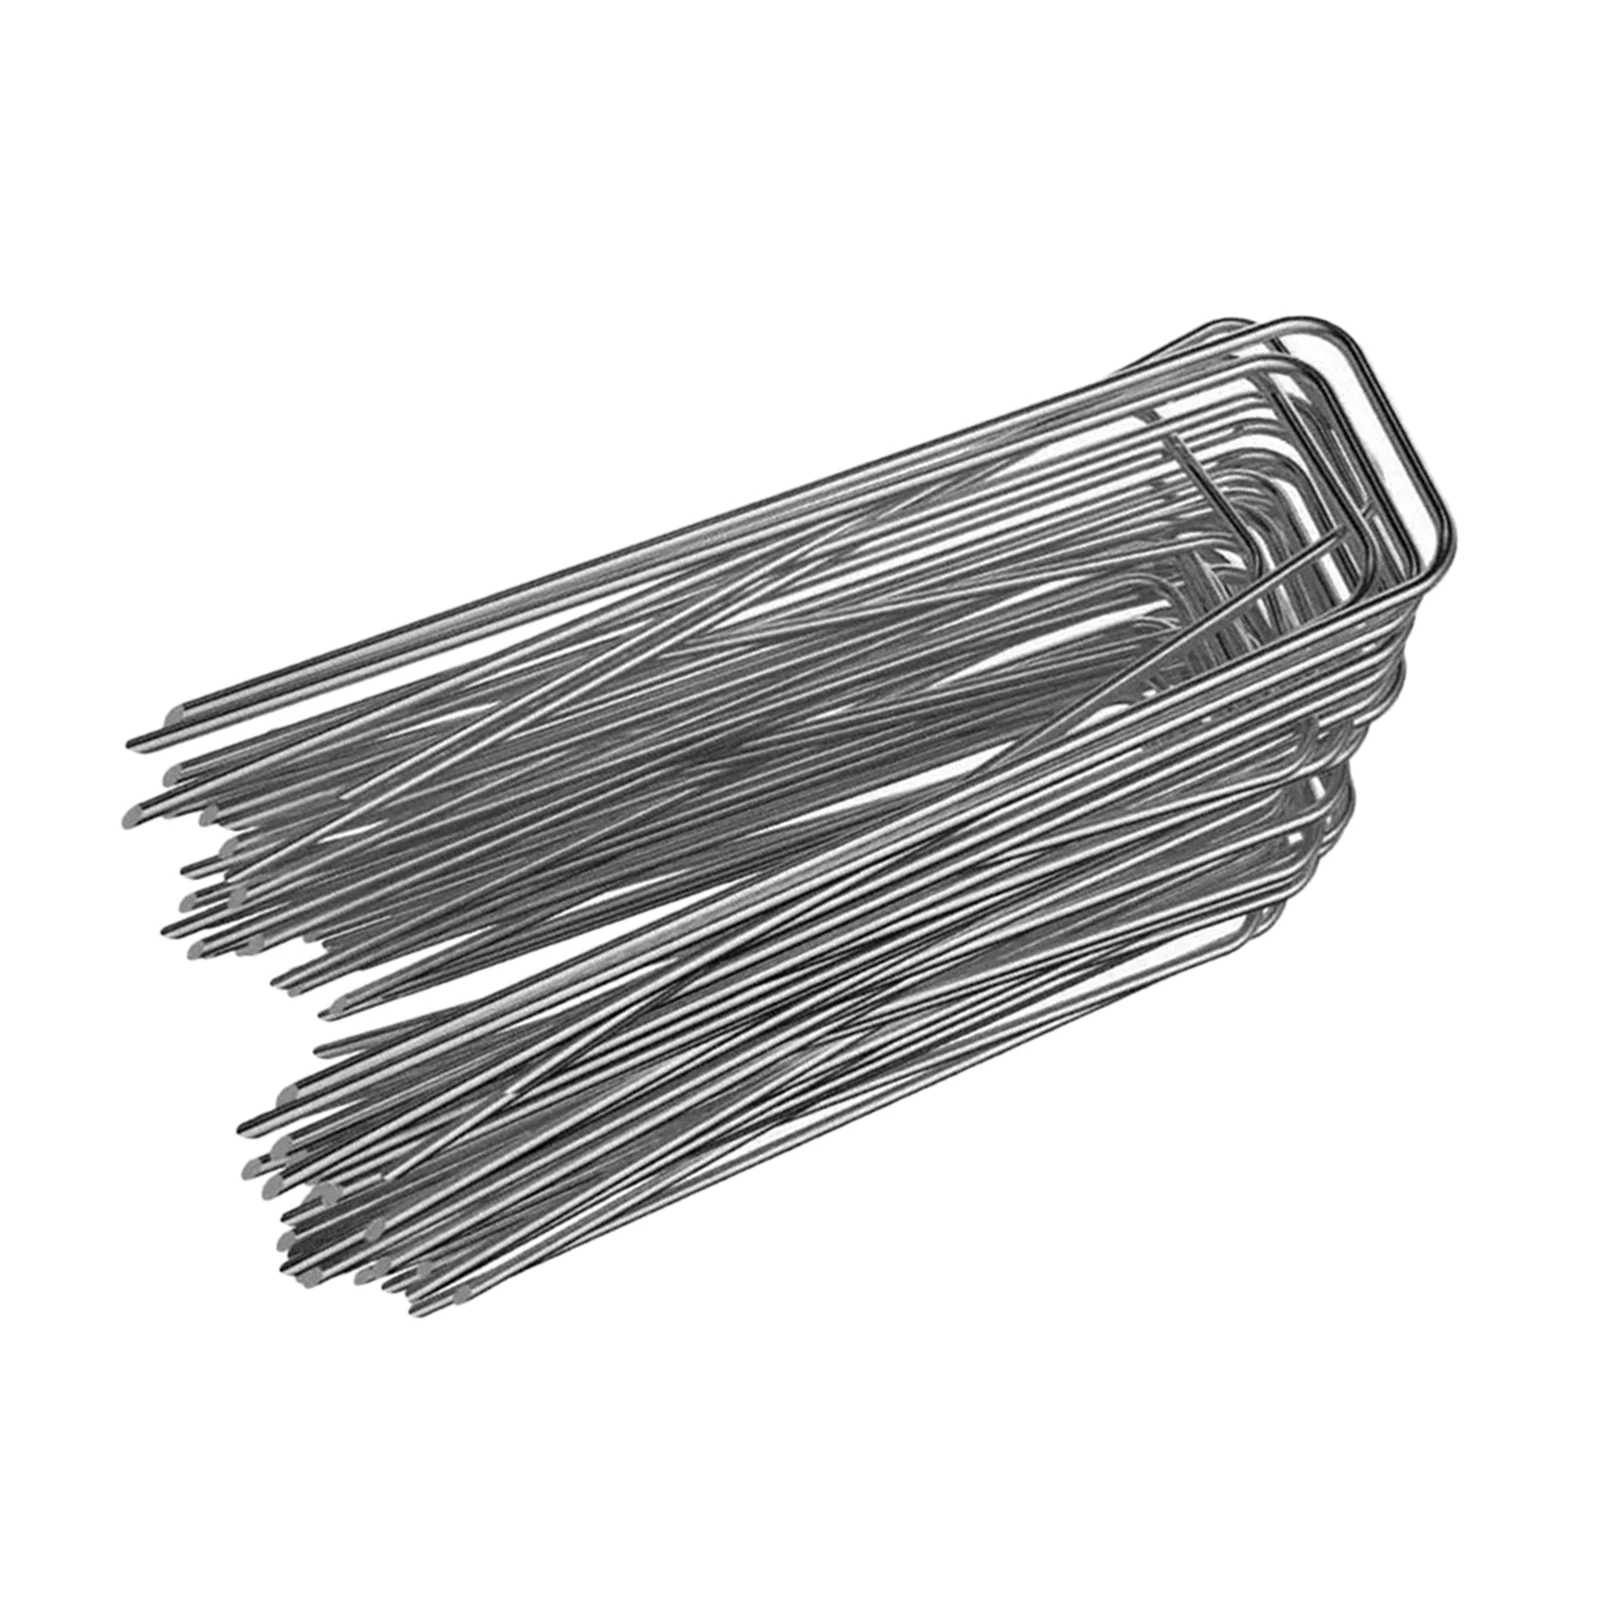 50pcs U-Shaped Fixing Nail Galvanized Steel Garden Pile Turf Nails For Fixing Weed Fabric Landscape Mesh Net